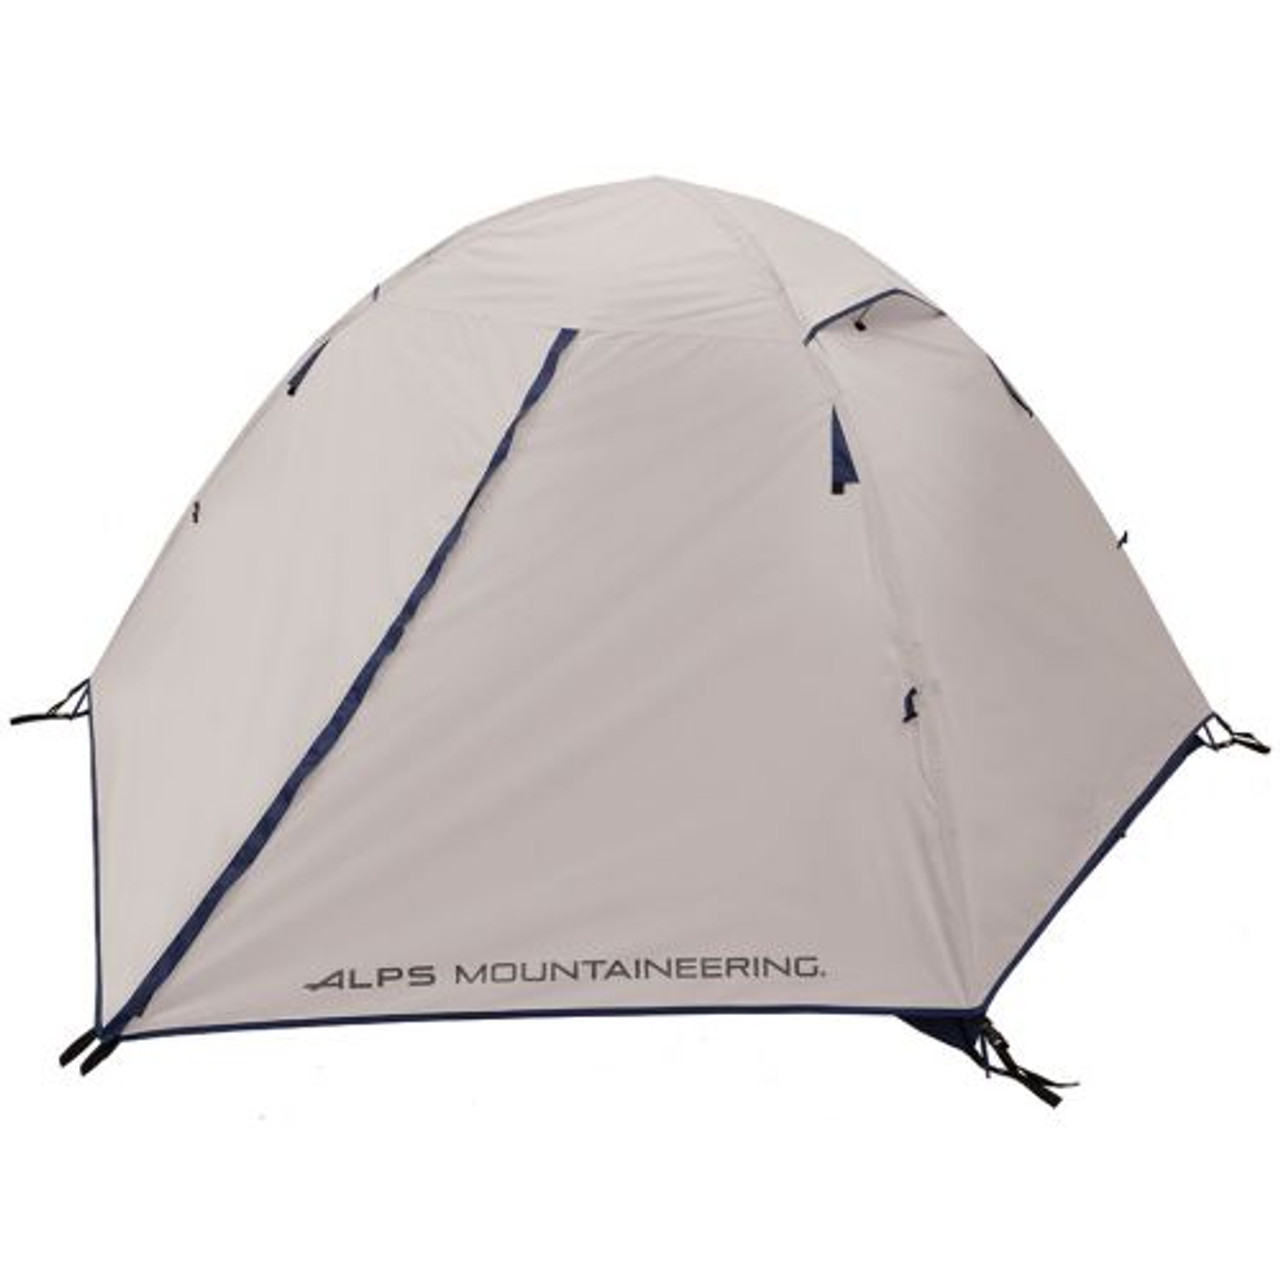 Lynx 2-Person Tent